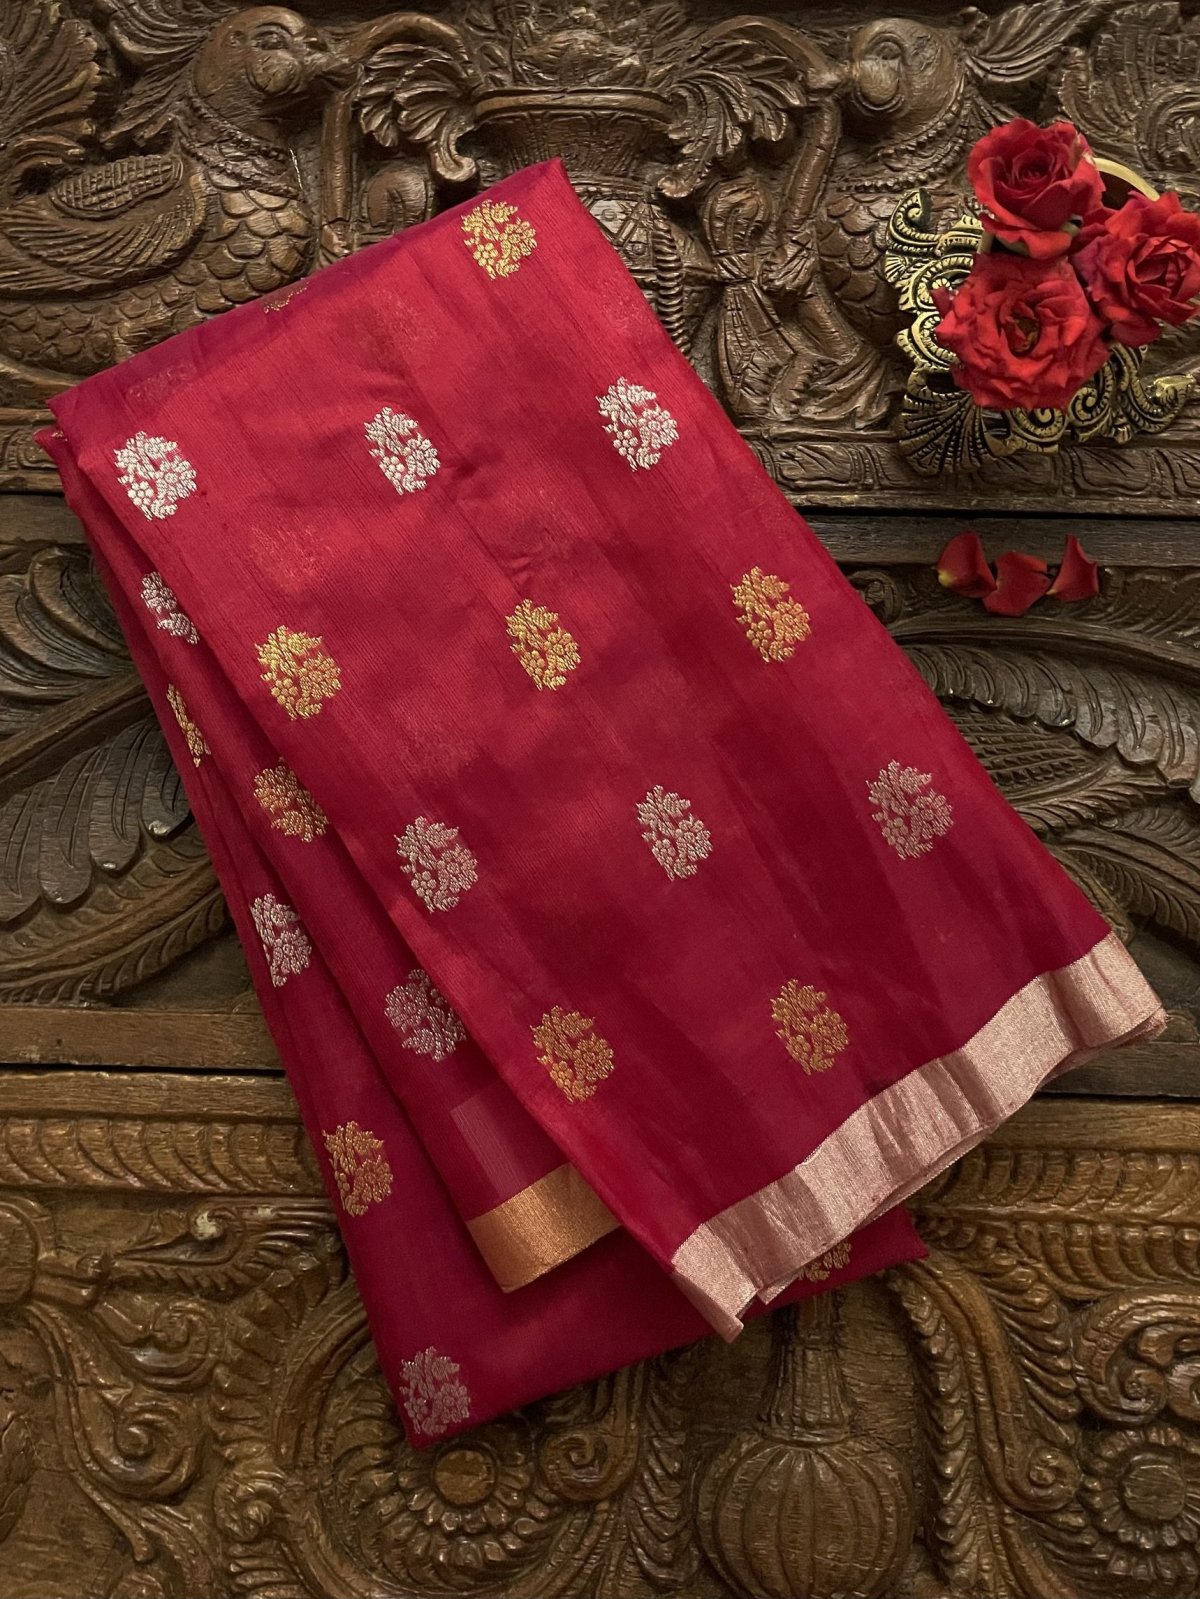 Ruby Red Chanderi Silk Blouse With Gold and Silver Zari Buttis